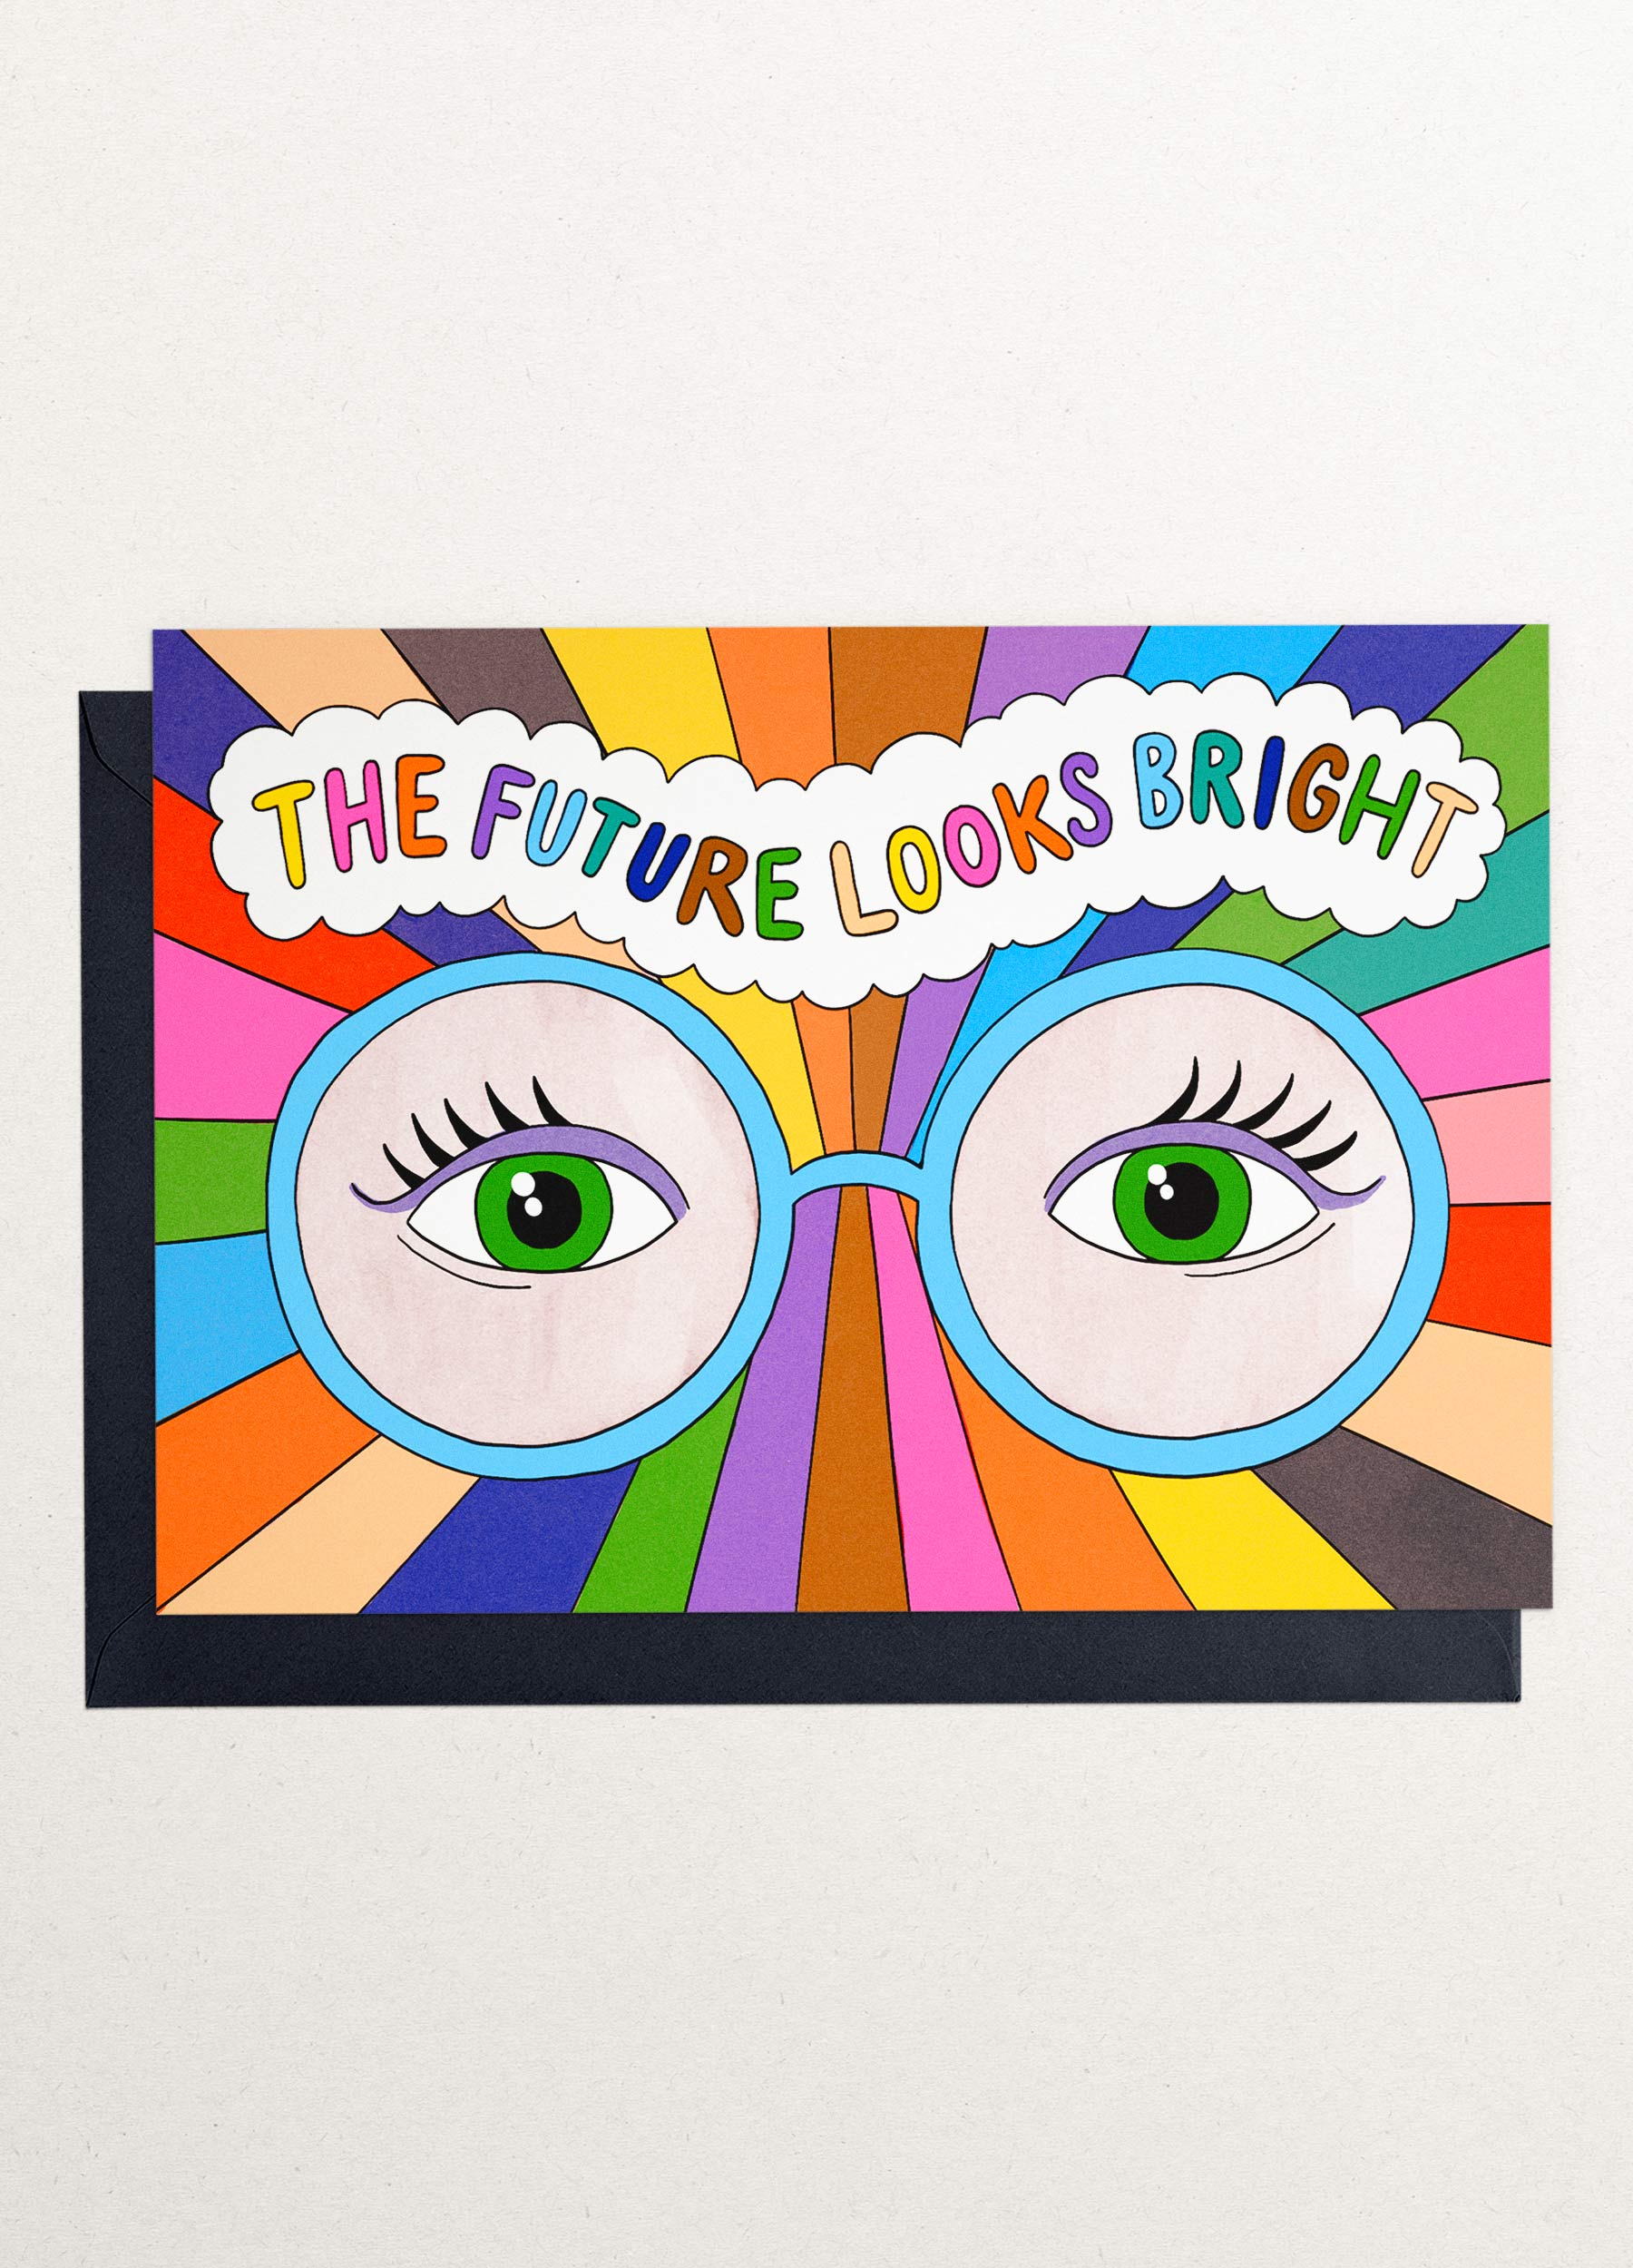 This is an image of a greeting card by Kiosk, that is illustrated by Georgia Perry. The card has an illustration of a pair of green eyes with colorful rays emanating from them. The rays are in various colors such as orange, pink, blue, green, and yellow. Above the eyes, there is a cloud with the text “The future looks bright” written in blue. The background is white and the illustration has a cartoon-like style. Partly showing behind it is a dark navy blue envelope.